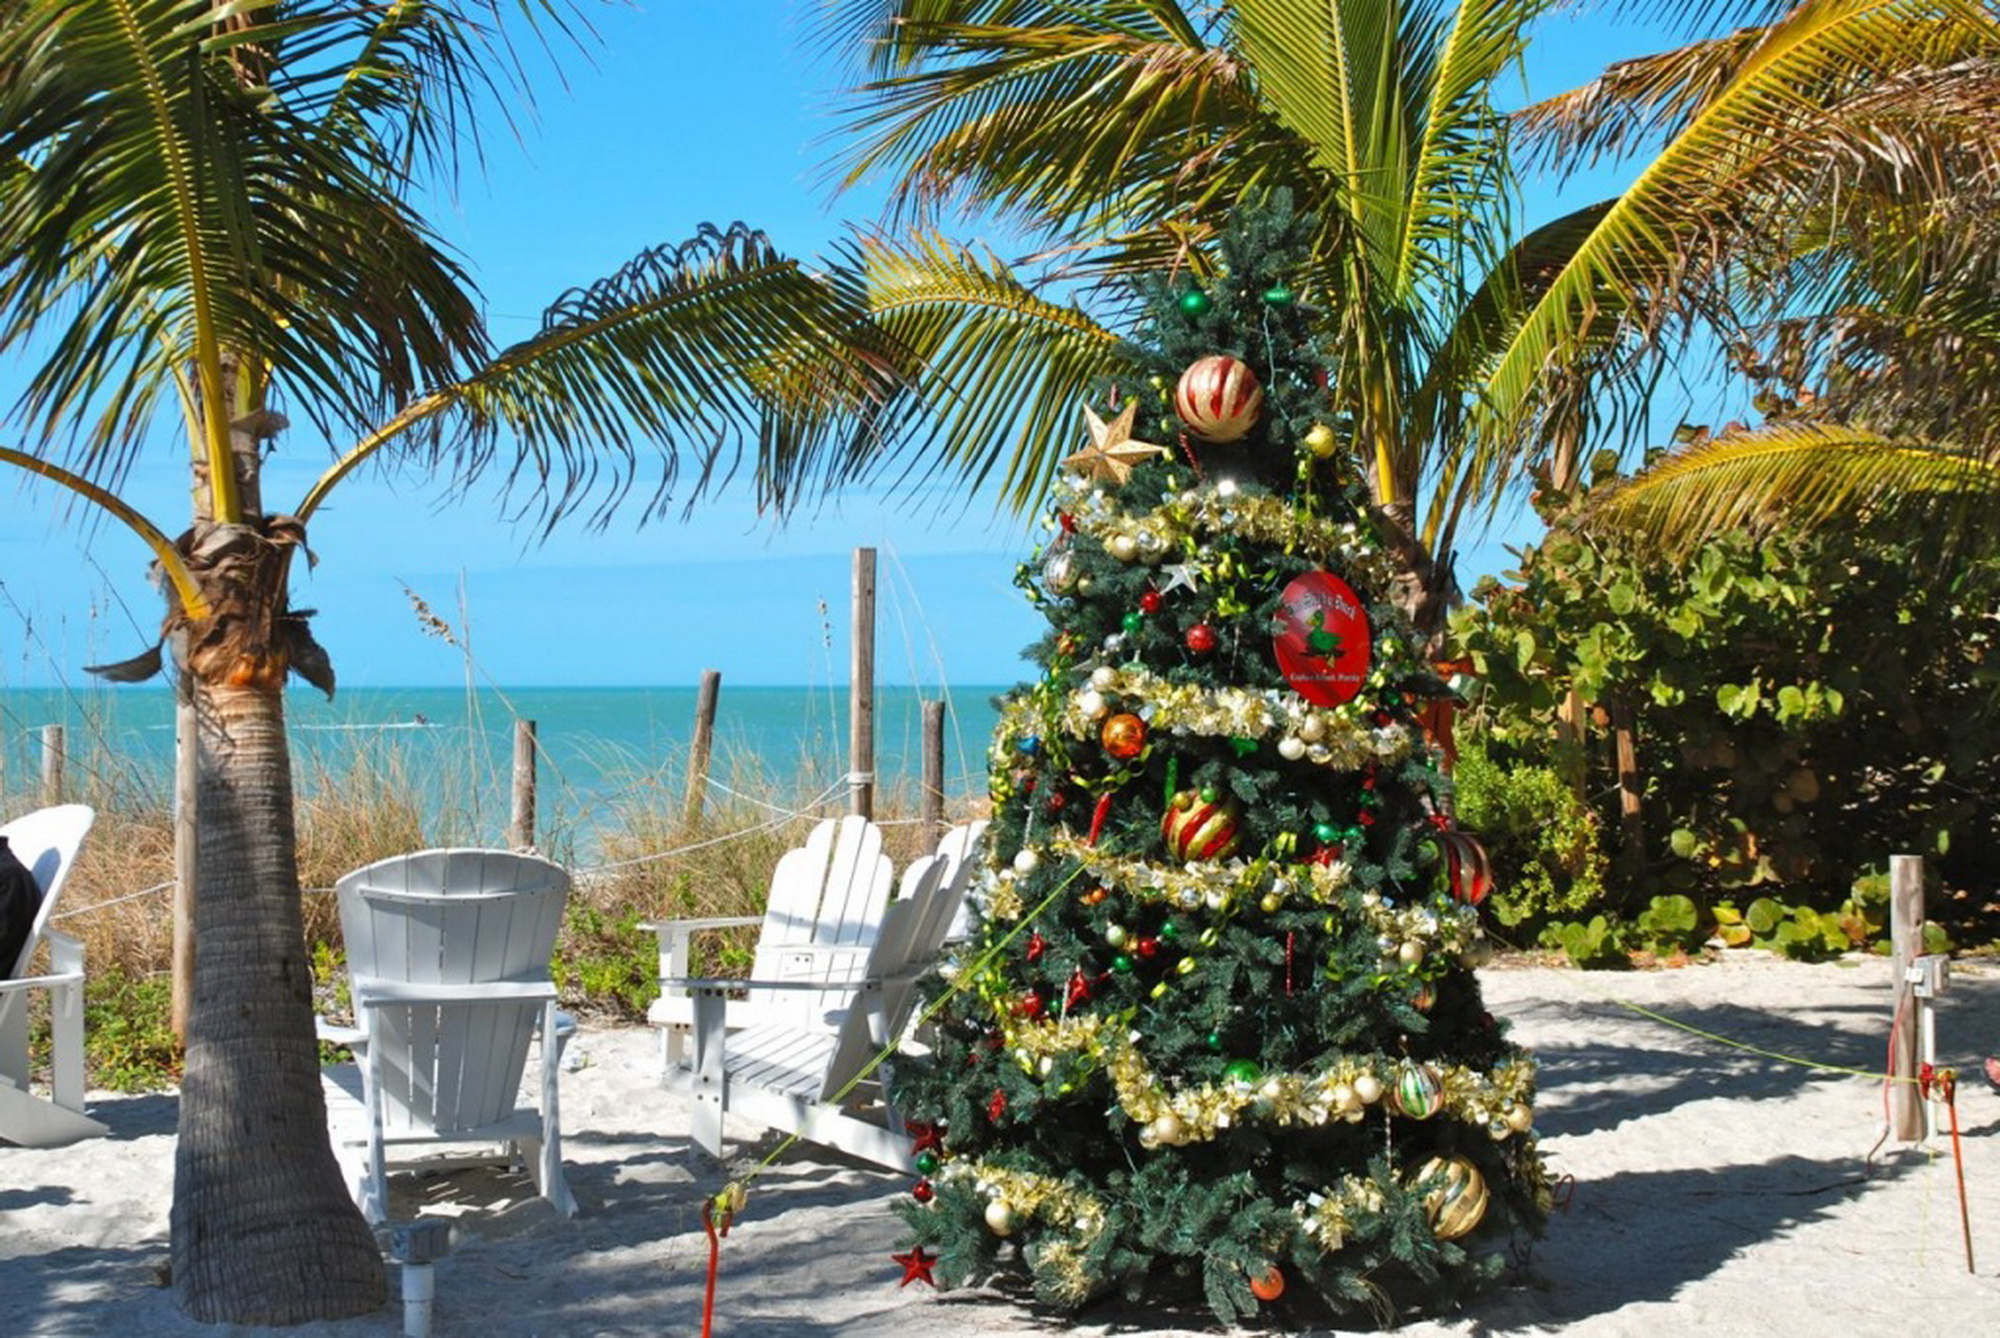 South Florida Vacation Rental Accommodations During The Holidays 7 Personal Injury South Florida Injury Law Firm